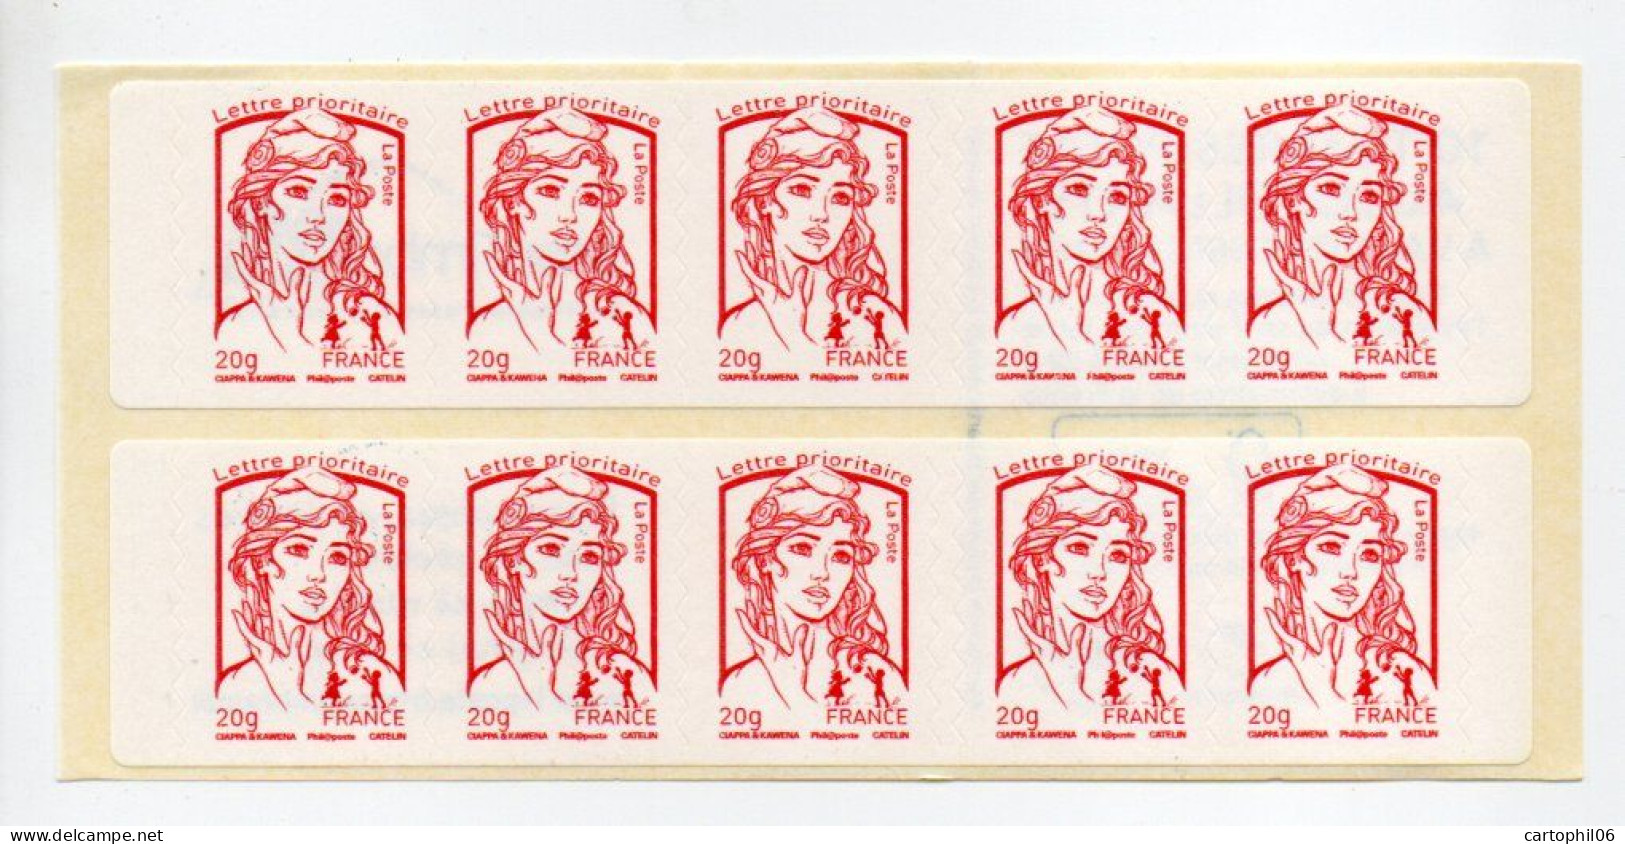 - FRANCE Carnet 10 Timbres Prioritaires Marianne De Ciappa - MON TIMBRAMOI - VALEUR FACIALE 14,30 € - - Modern : 1959-...